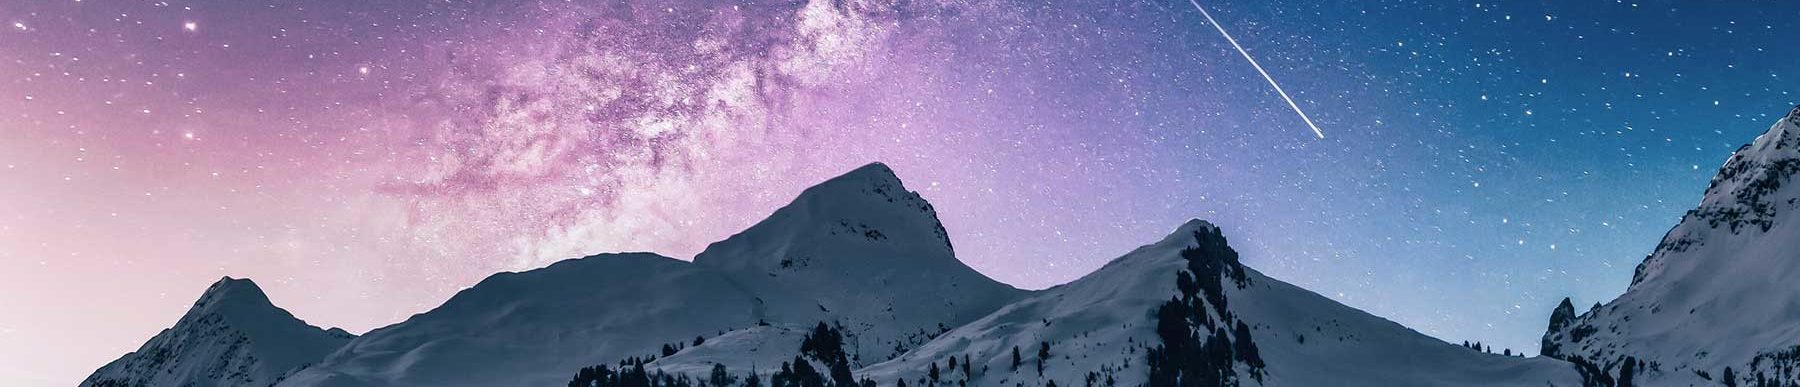 Snow covered mountains in purple sky with a shooting star and the milky way